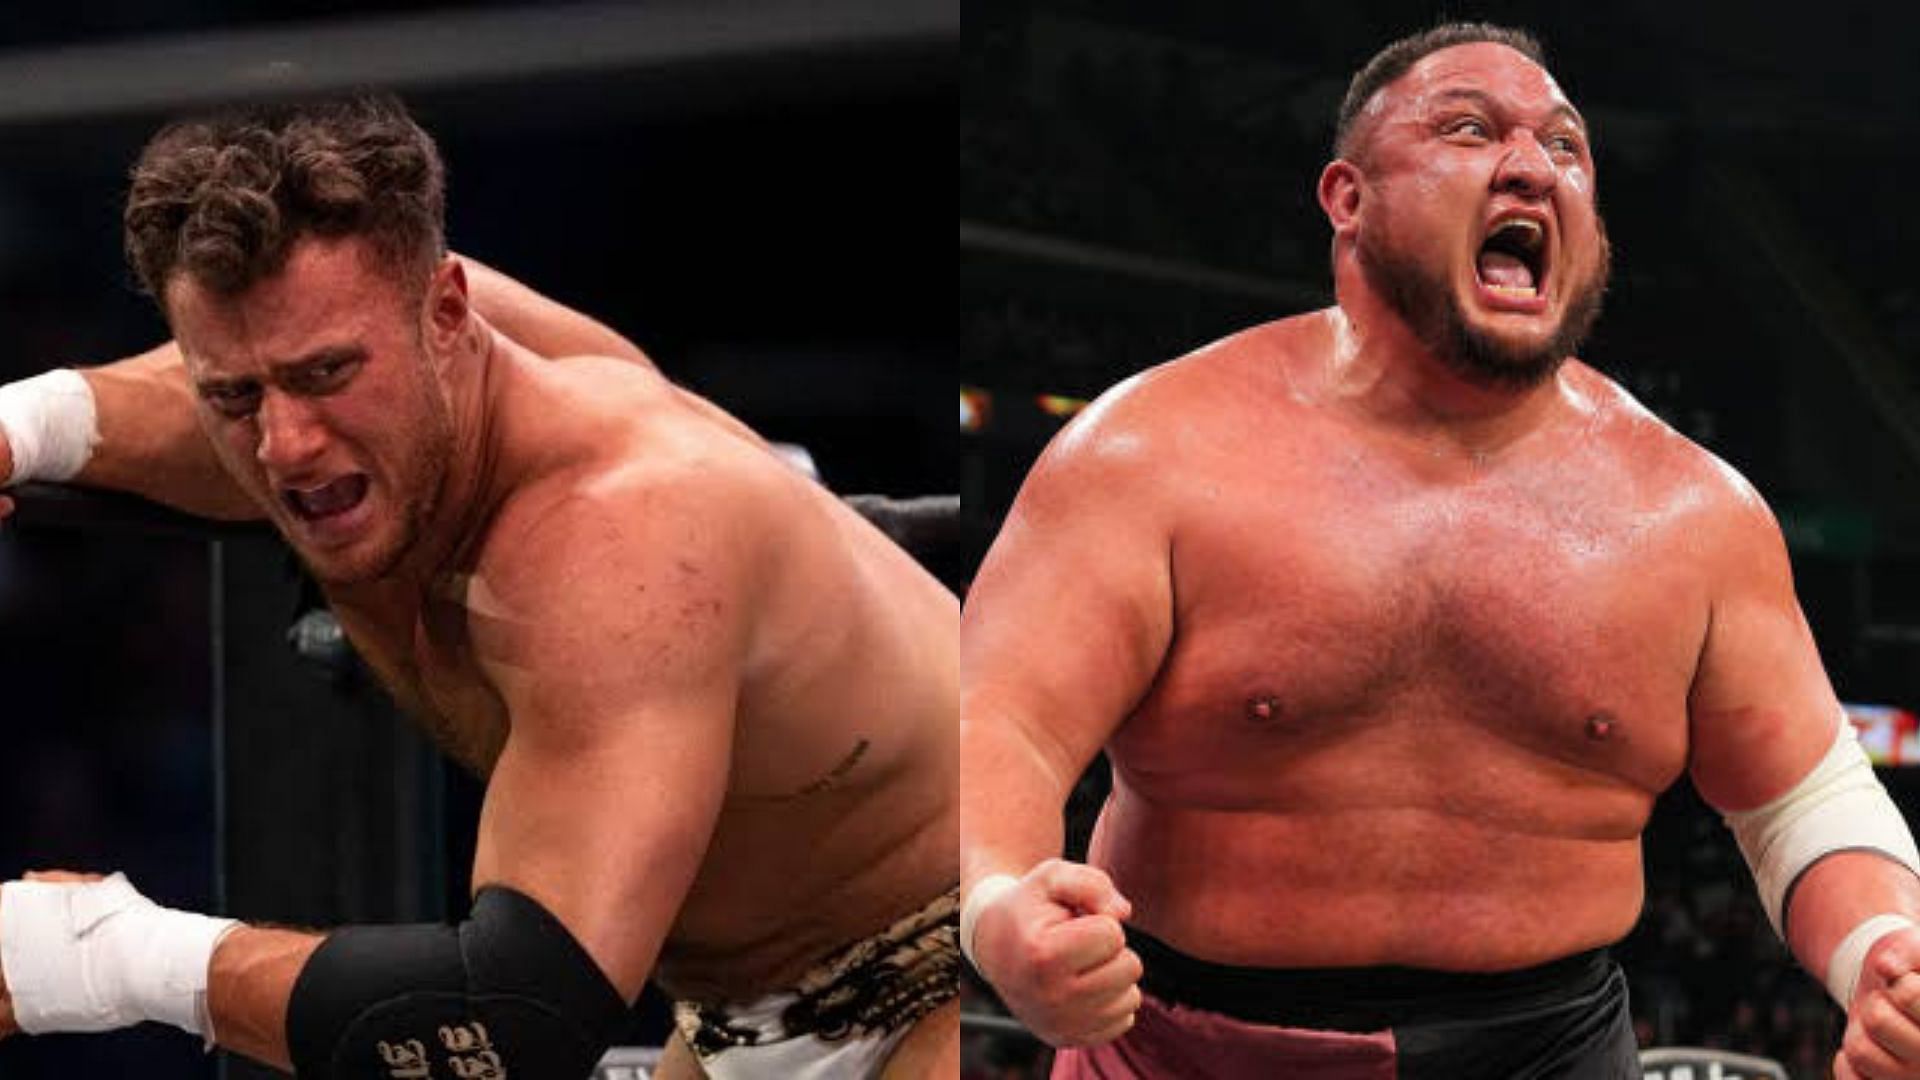 MJF is scheduled to face Samoa Joe at AEW Worlds End.